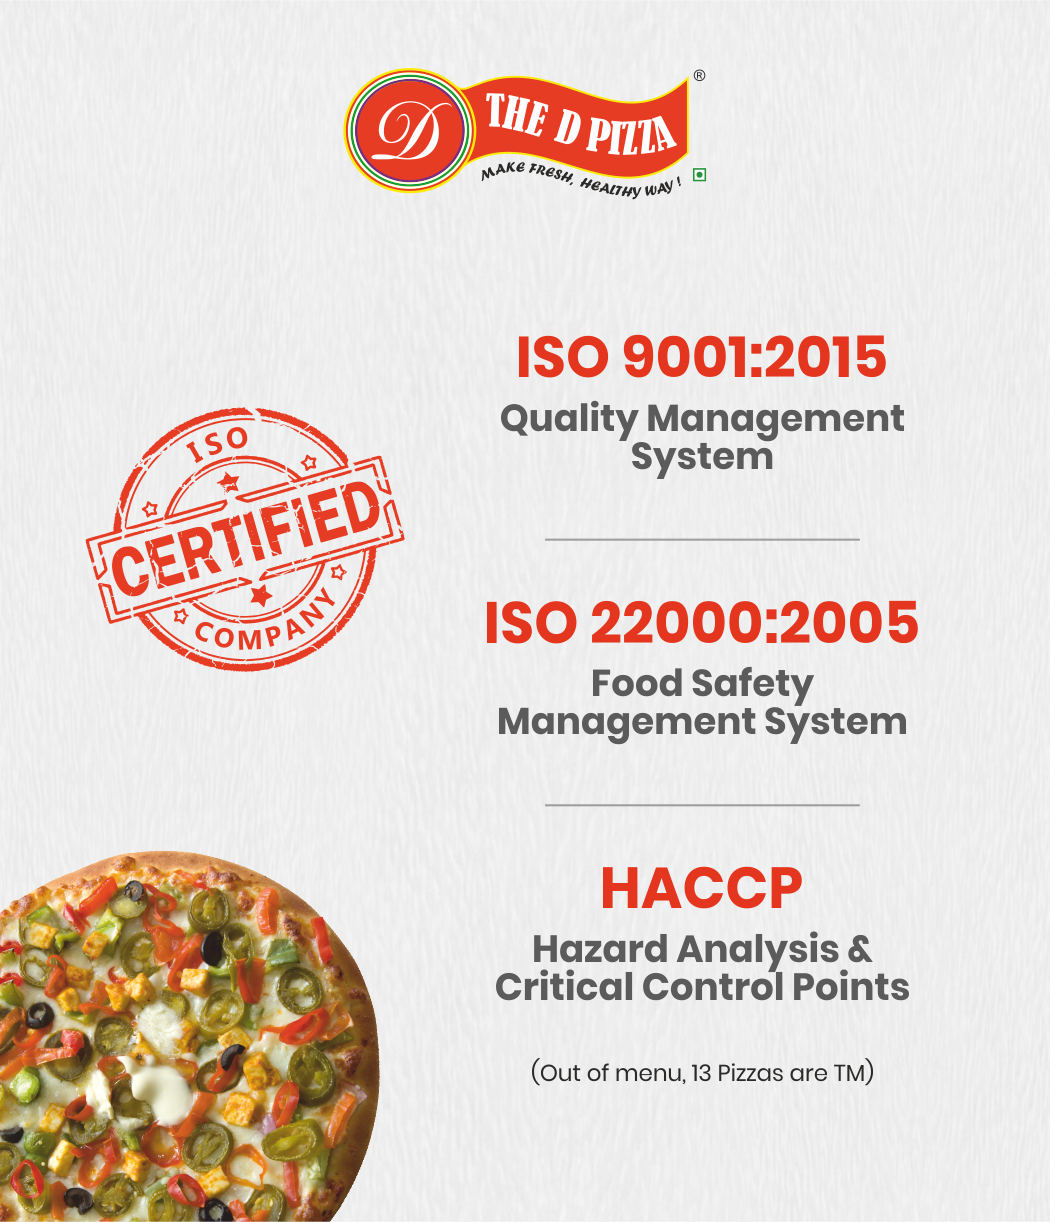 Thedpizza-ISO Certificate